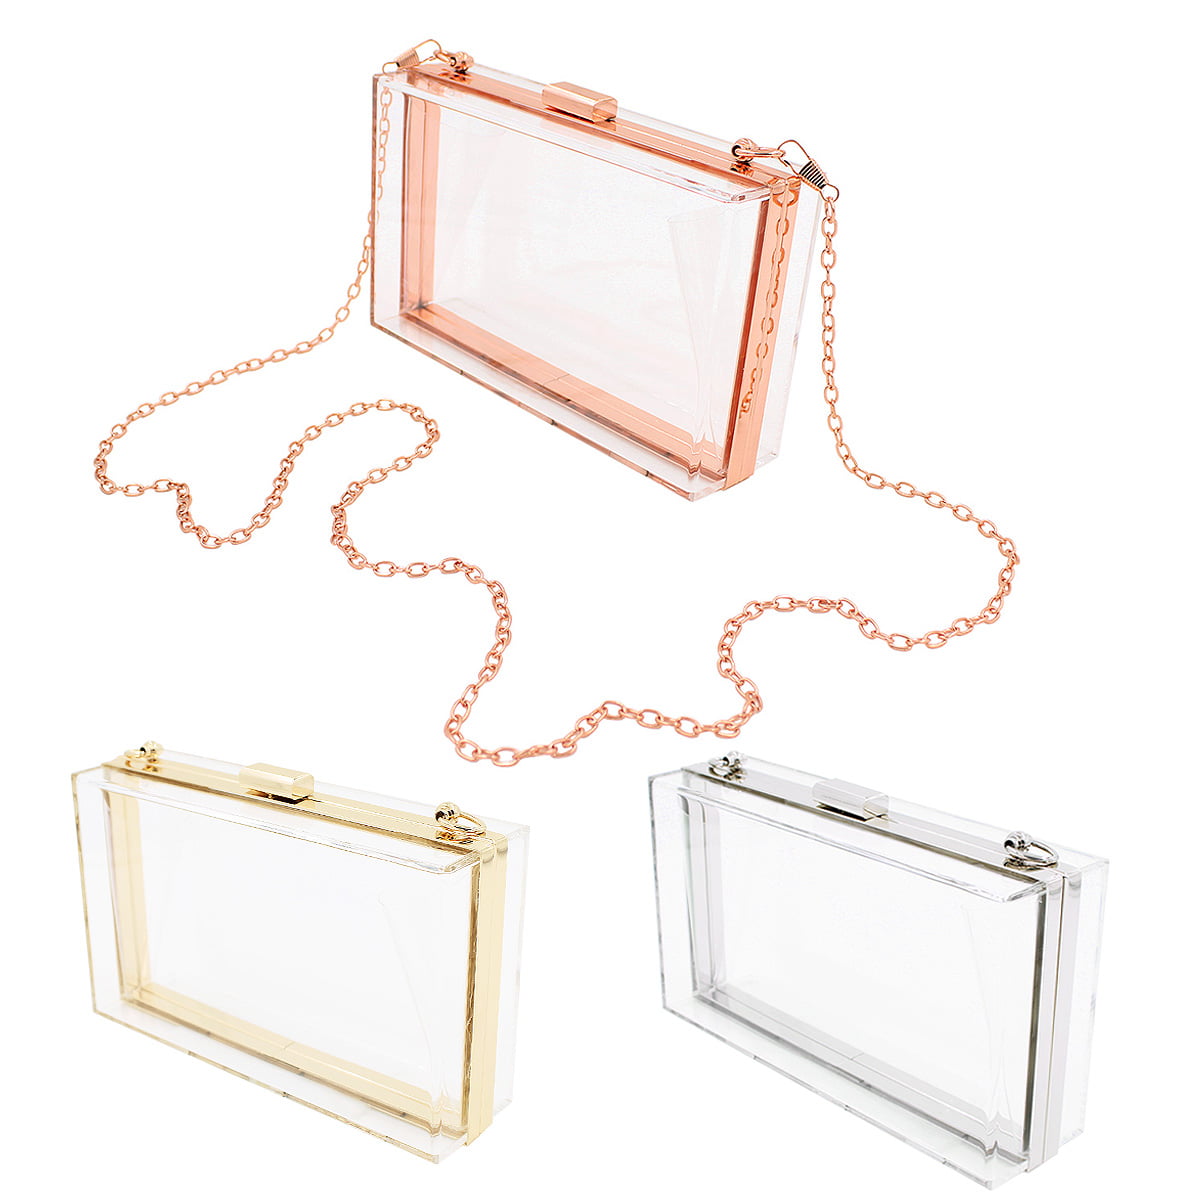 Wholesale Cute Fashionable Transparent Shoulder Handbag evening box bags,  Women Clear Purse Acrylic Clear Clutch Bag With Gold Chain Strap From  m.alibaba.com